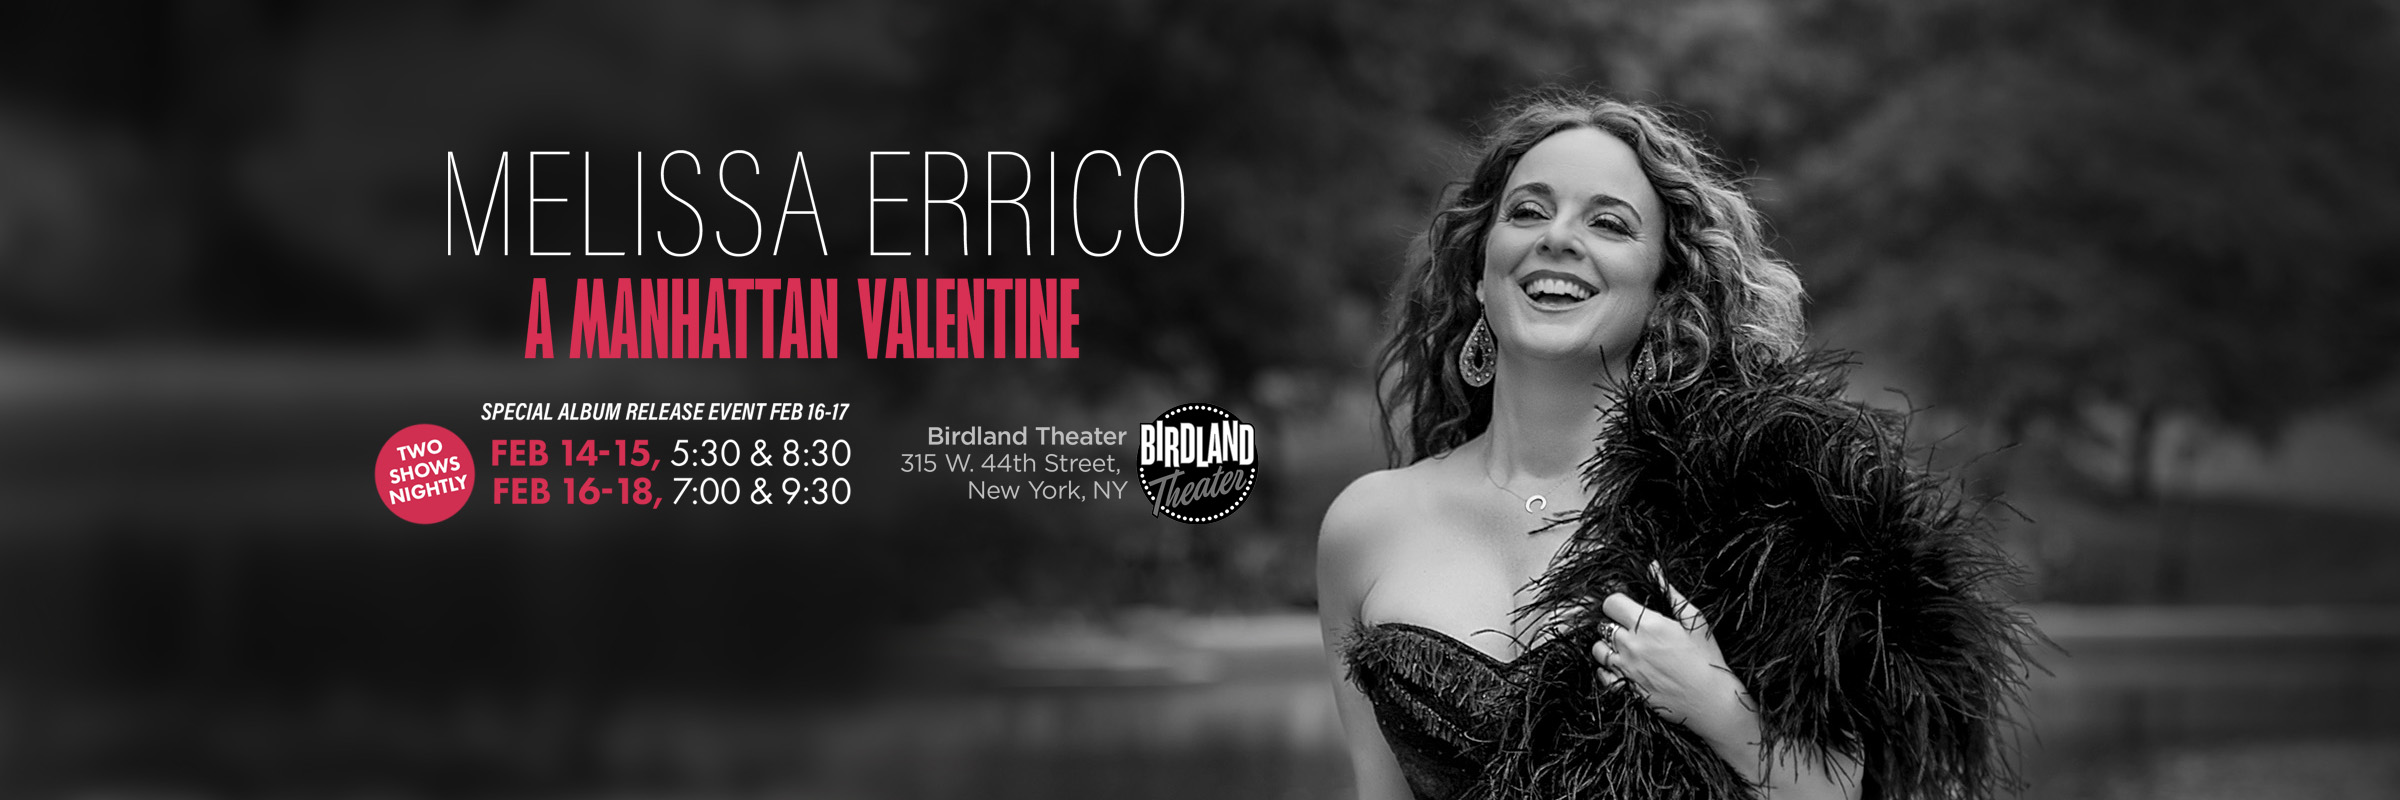 Melissa Errico will be performing at Birdland in NYC from February 14th to the 18th